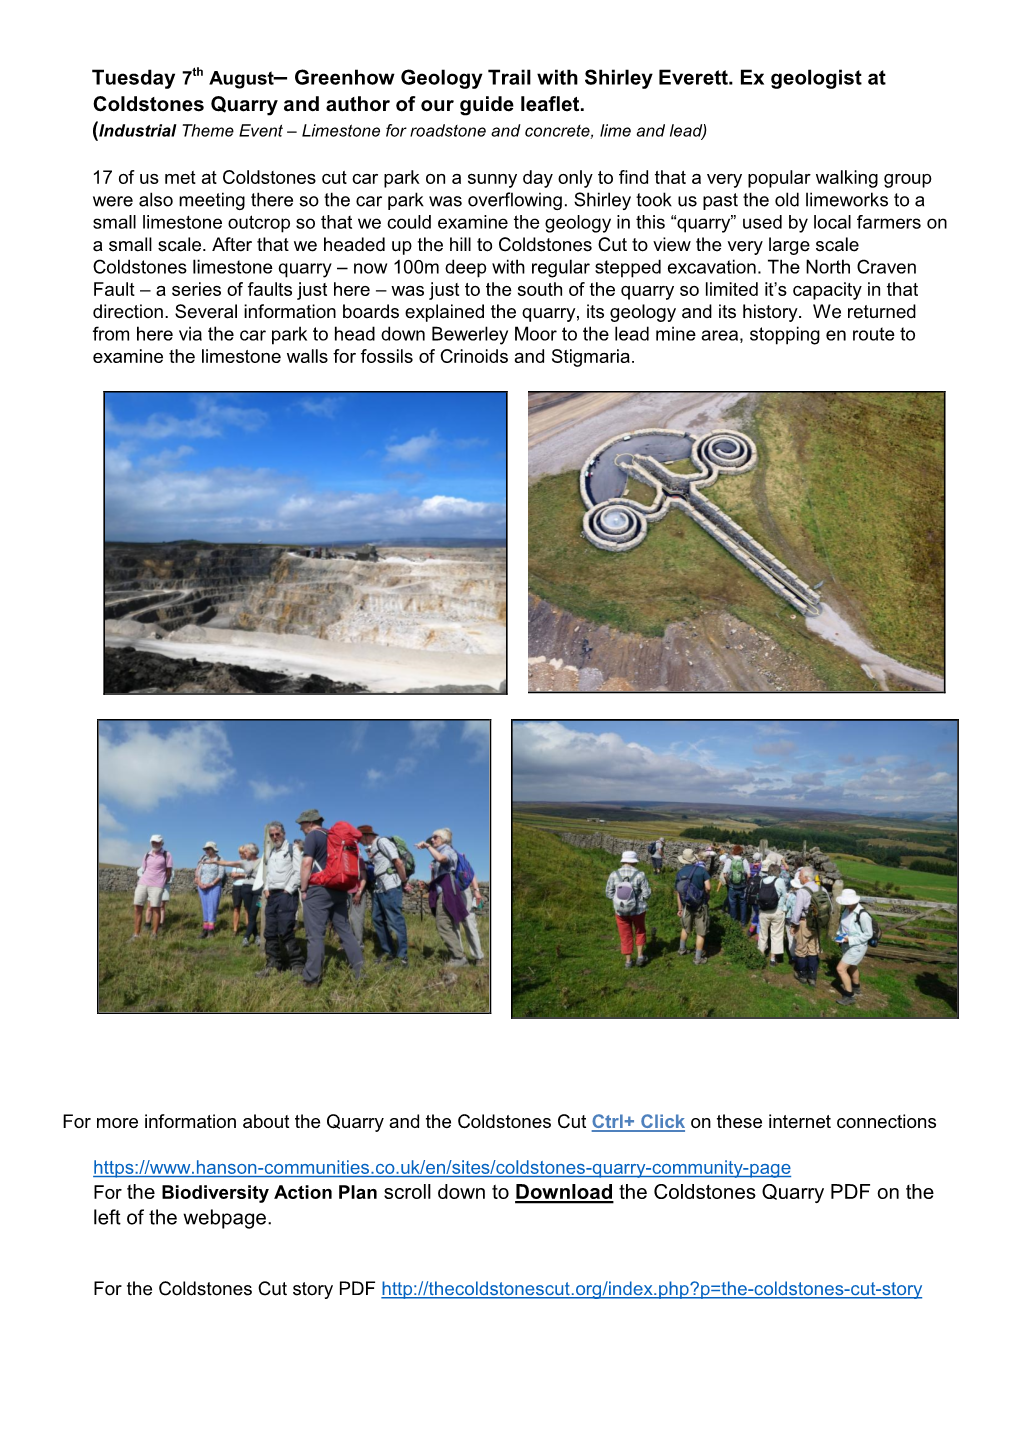 Greenhow Geology Trail with Shirley Everett. Ex Geologist at Coldstones Quarry and Author of Our Guide Leaflet